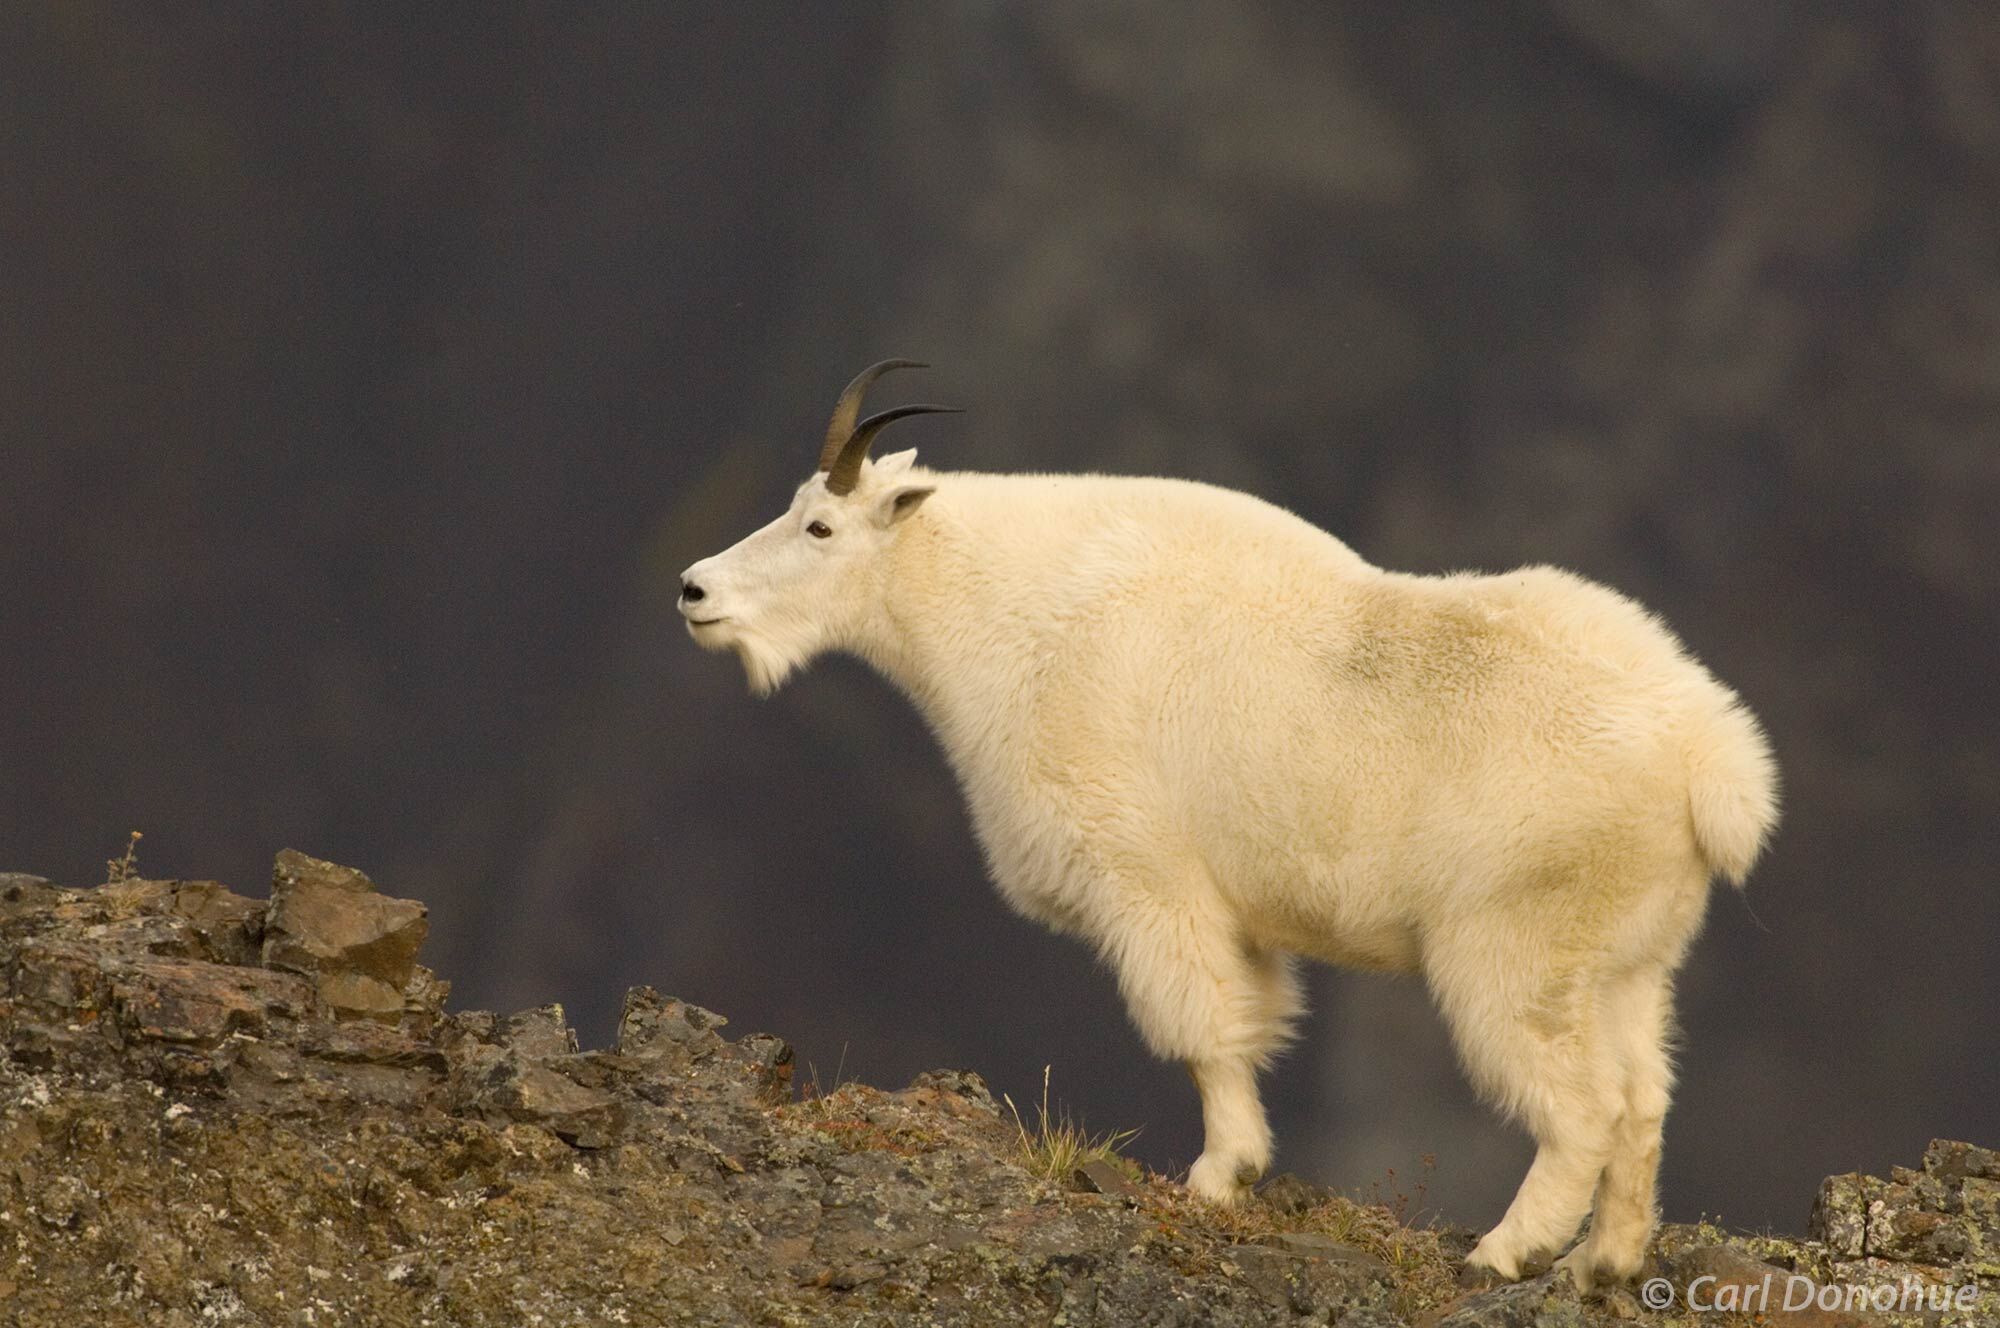 The mountain goat is a resilient animal, well-adapted to the rugged environment of Wrangell-St. Elias National Park, where it...